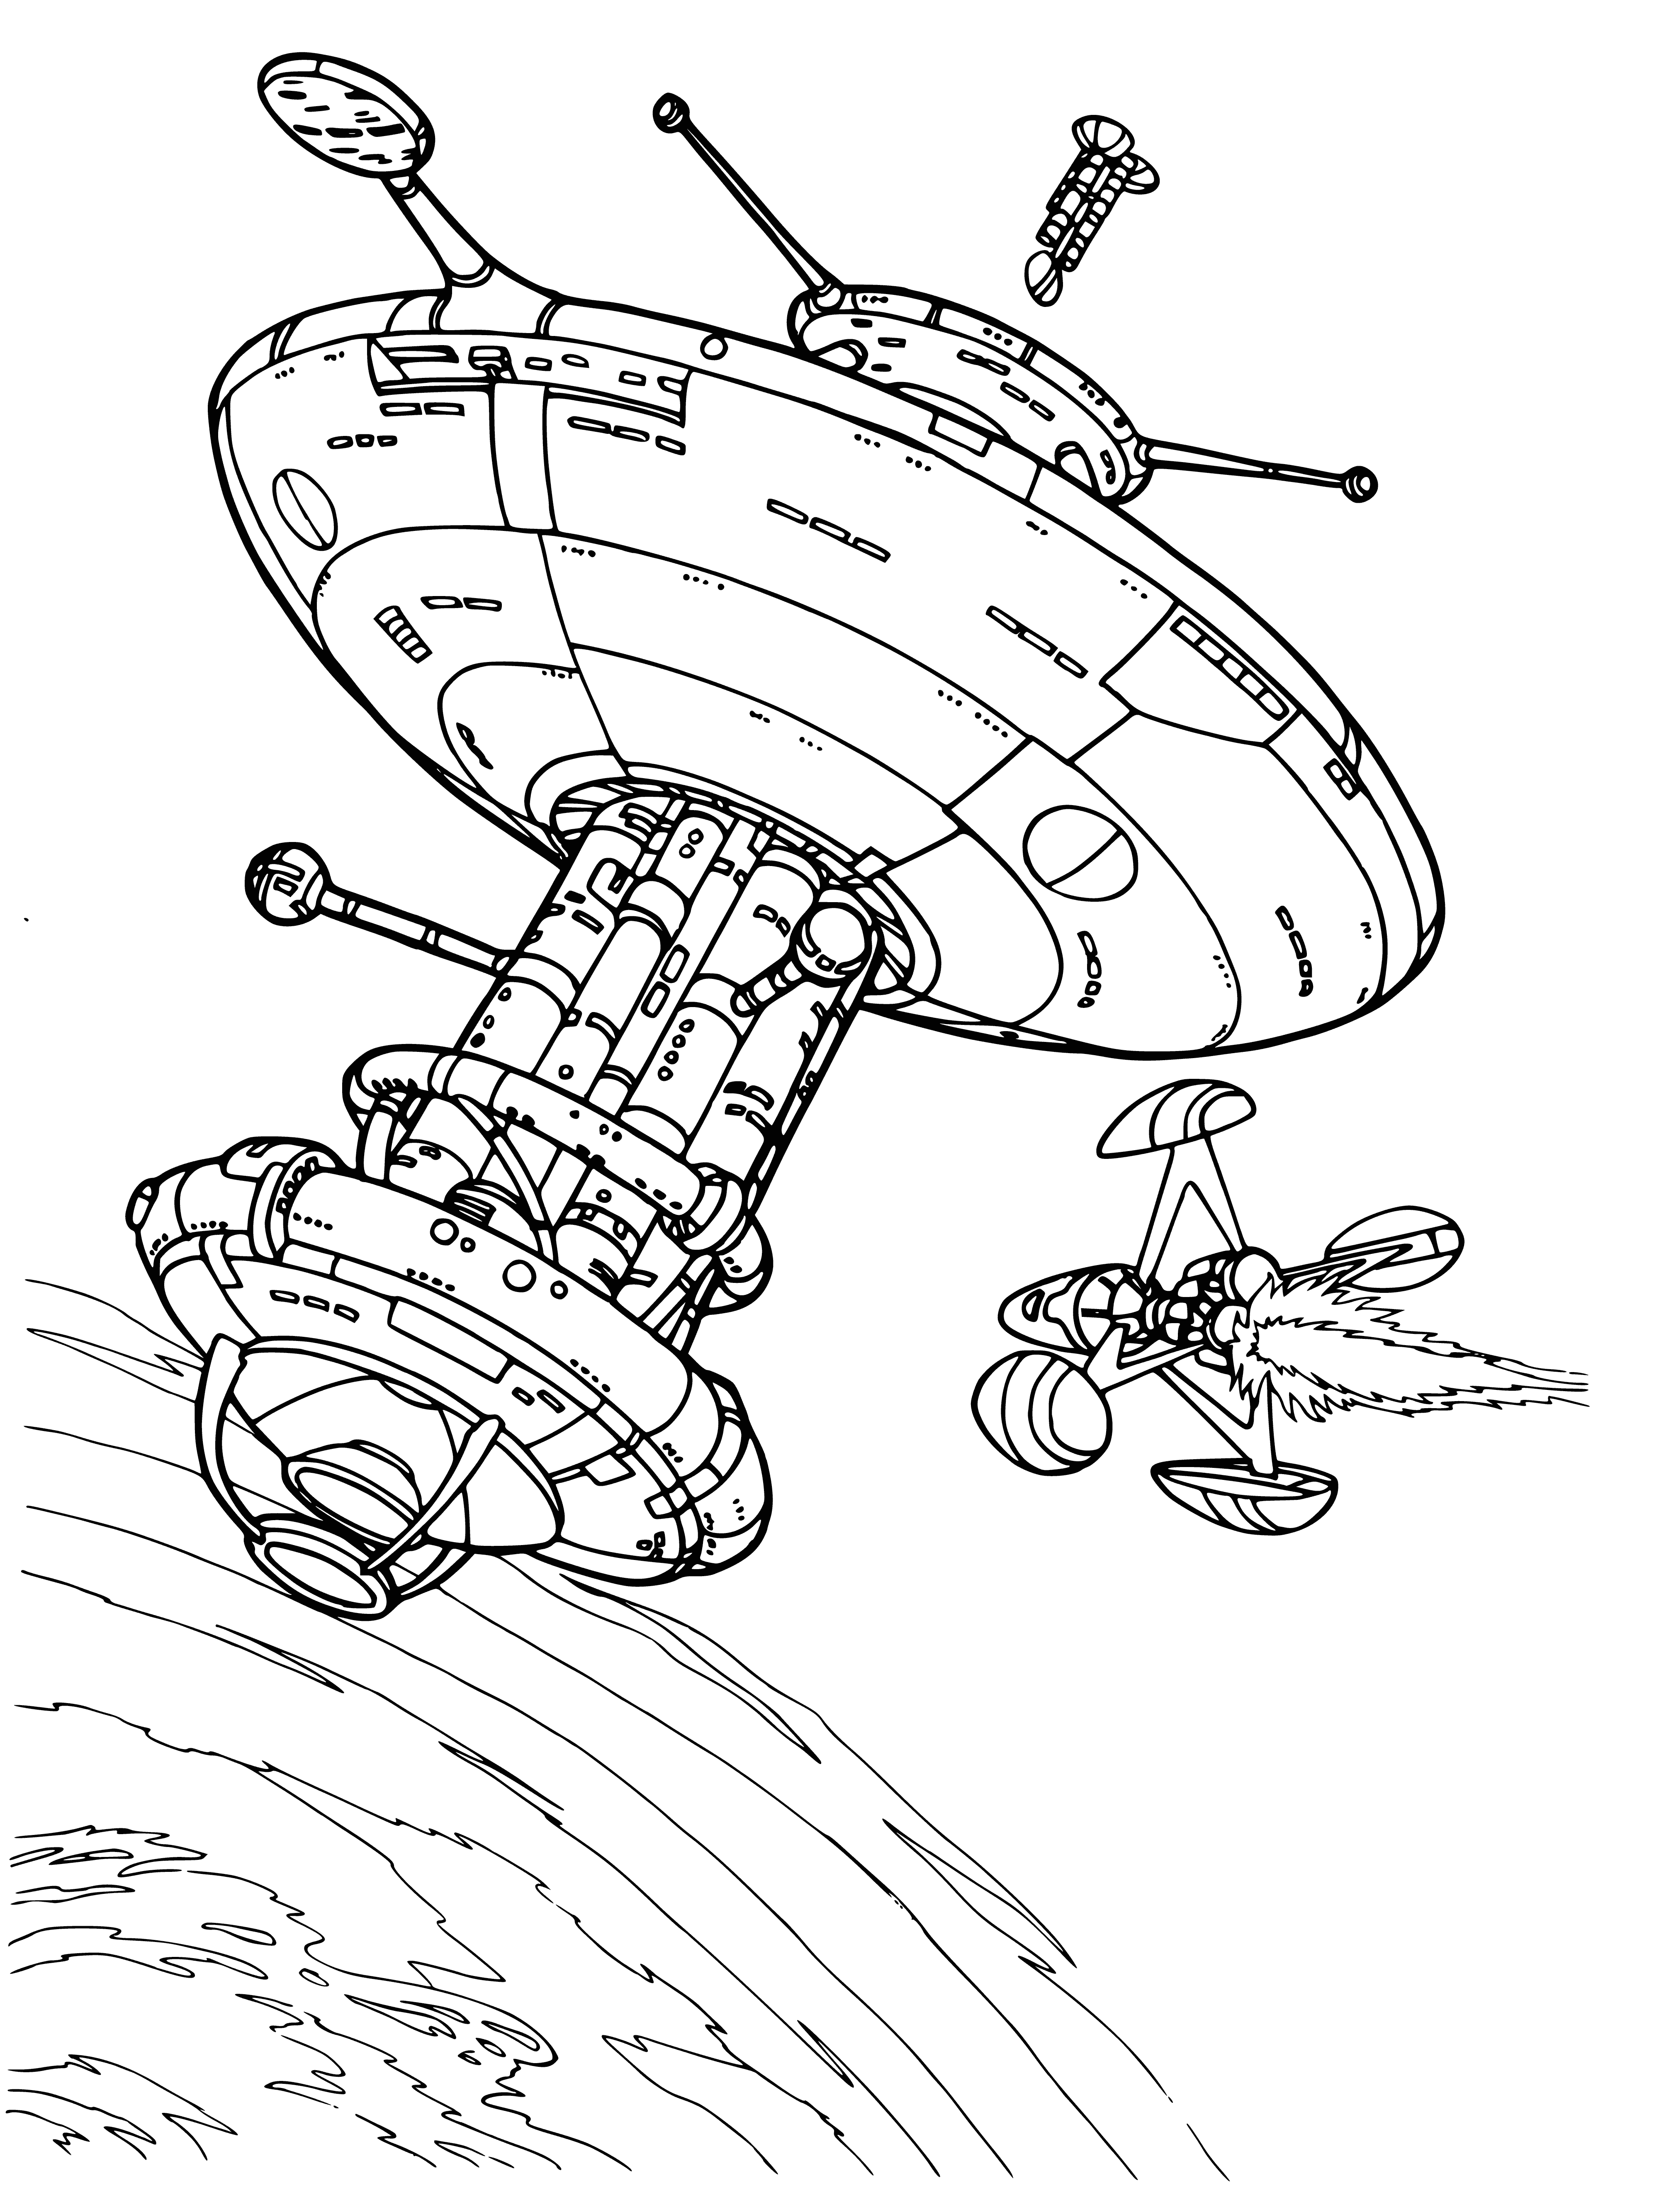 coloring page: Station floats in space, has cylindrical rotating section, solar panels, large+small antenna, connected to spacecraft. #spaceexploration